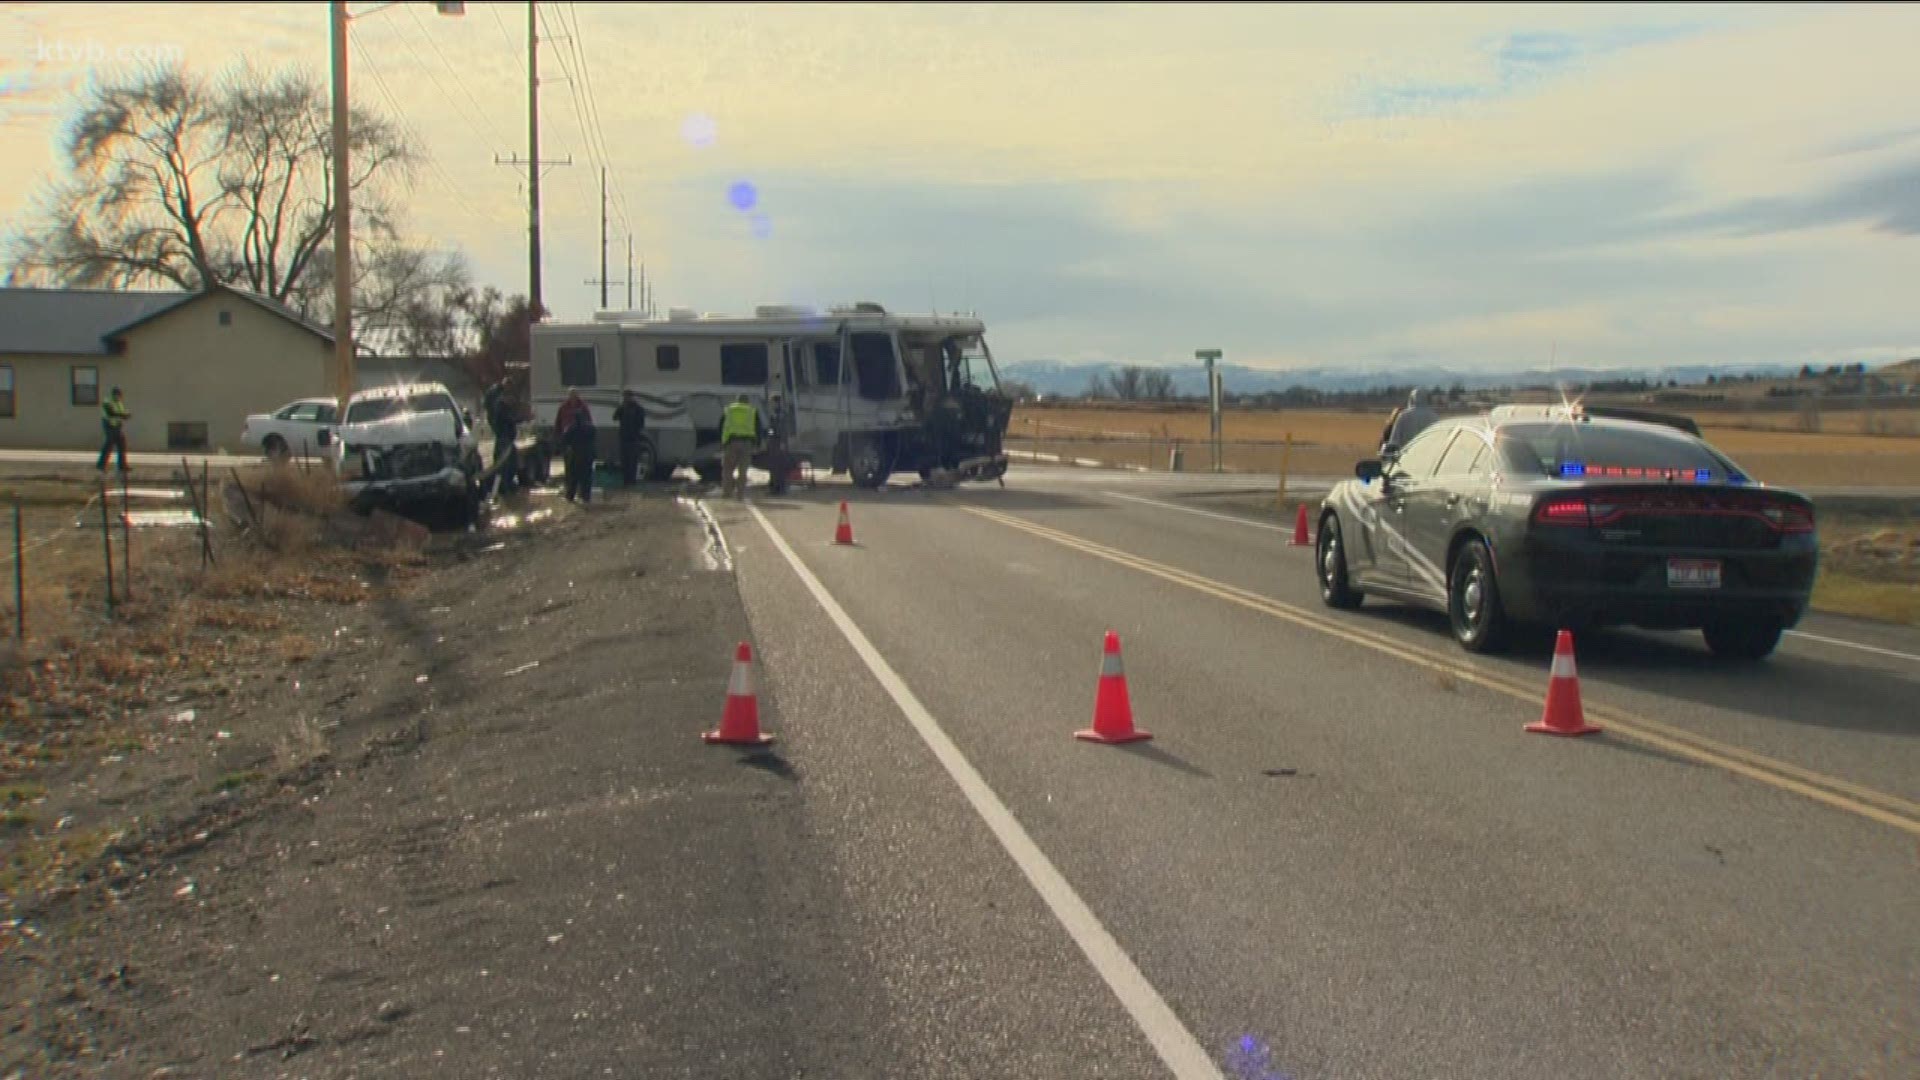 Police say the driver of the motorhome was not wearing a seatbelt and was ejected from the vehicle. He was flown by air ambulance to a Boise hospital.